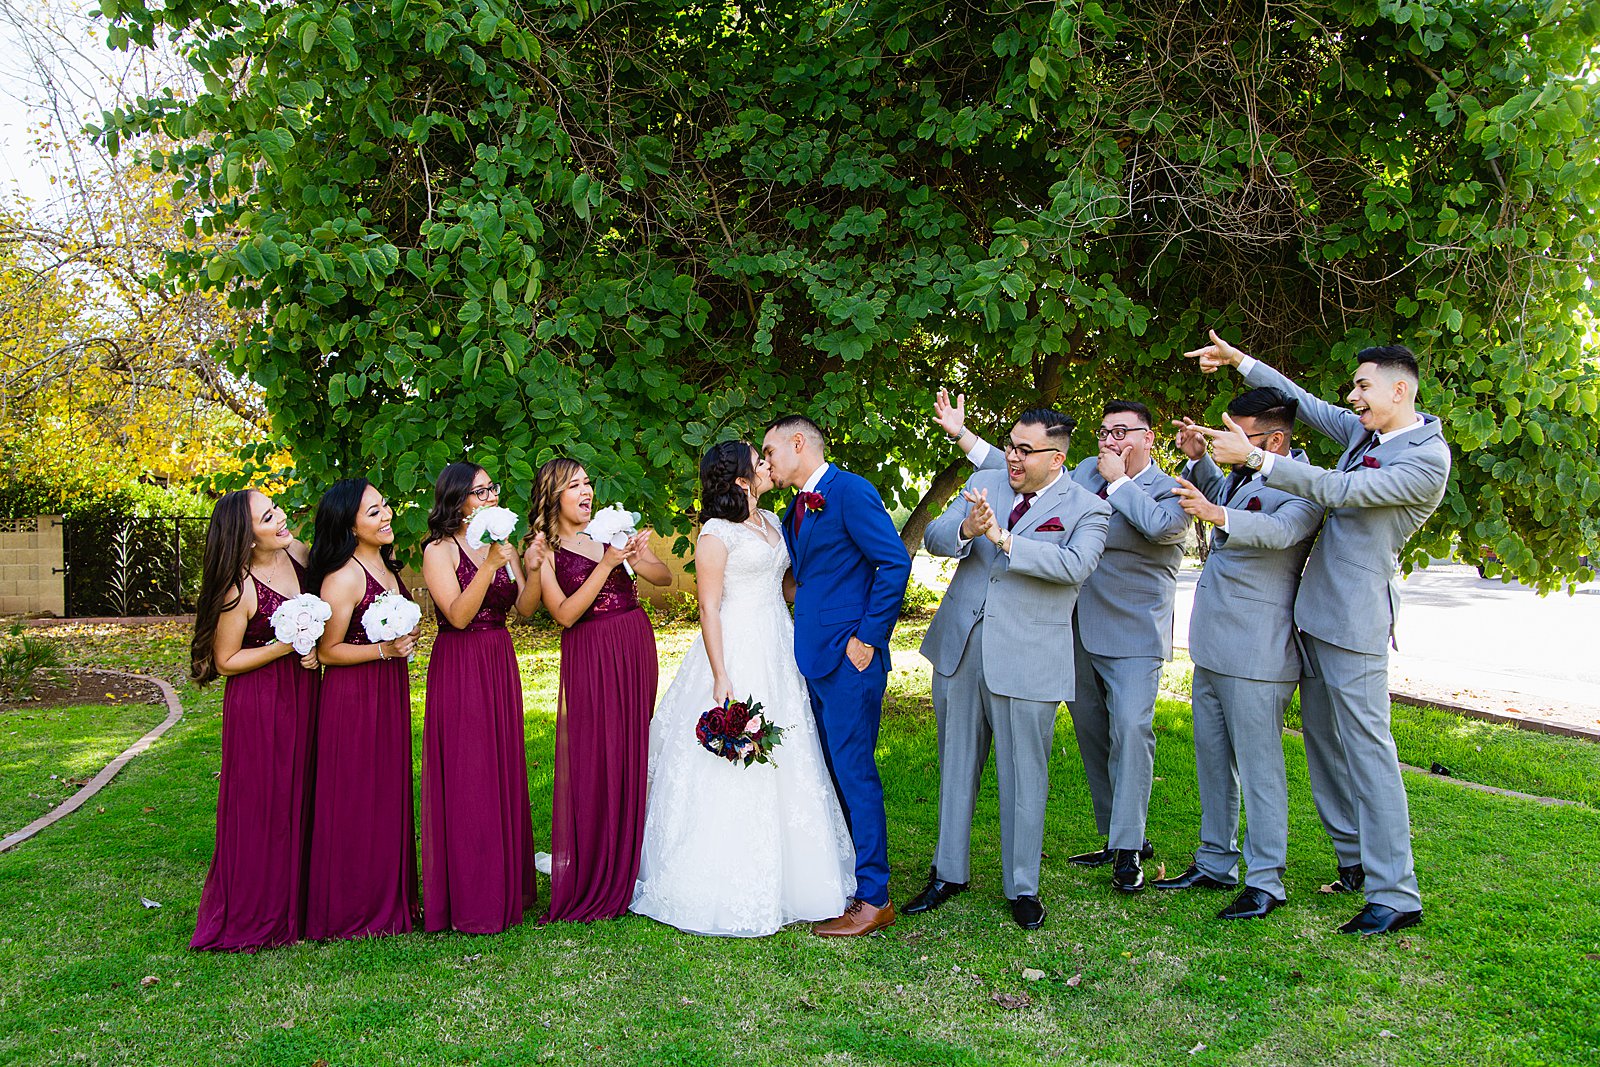 Bridal party having fun together at Valley Garden Center weding by Arizona wedding photographer PMA Photography.